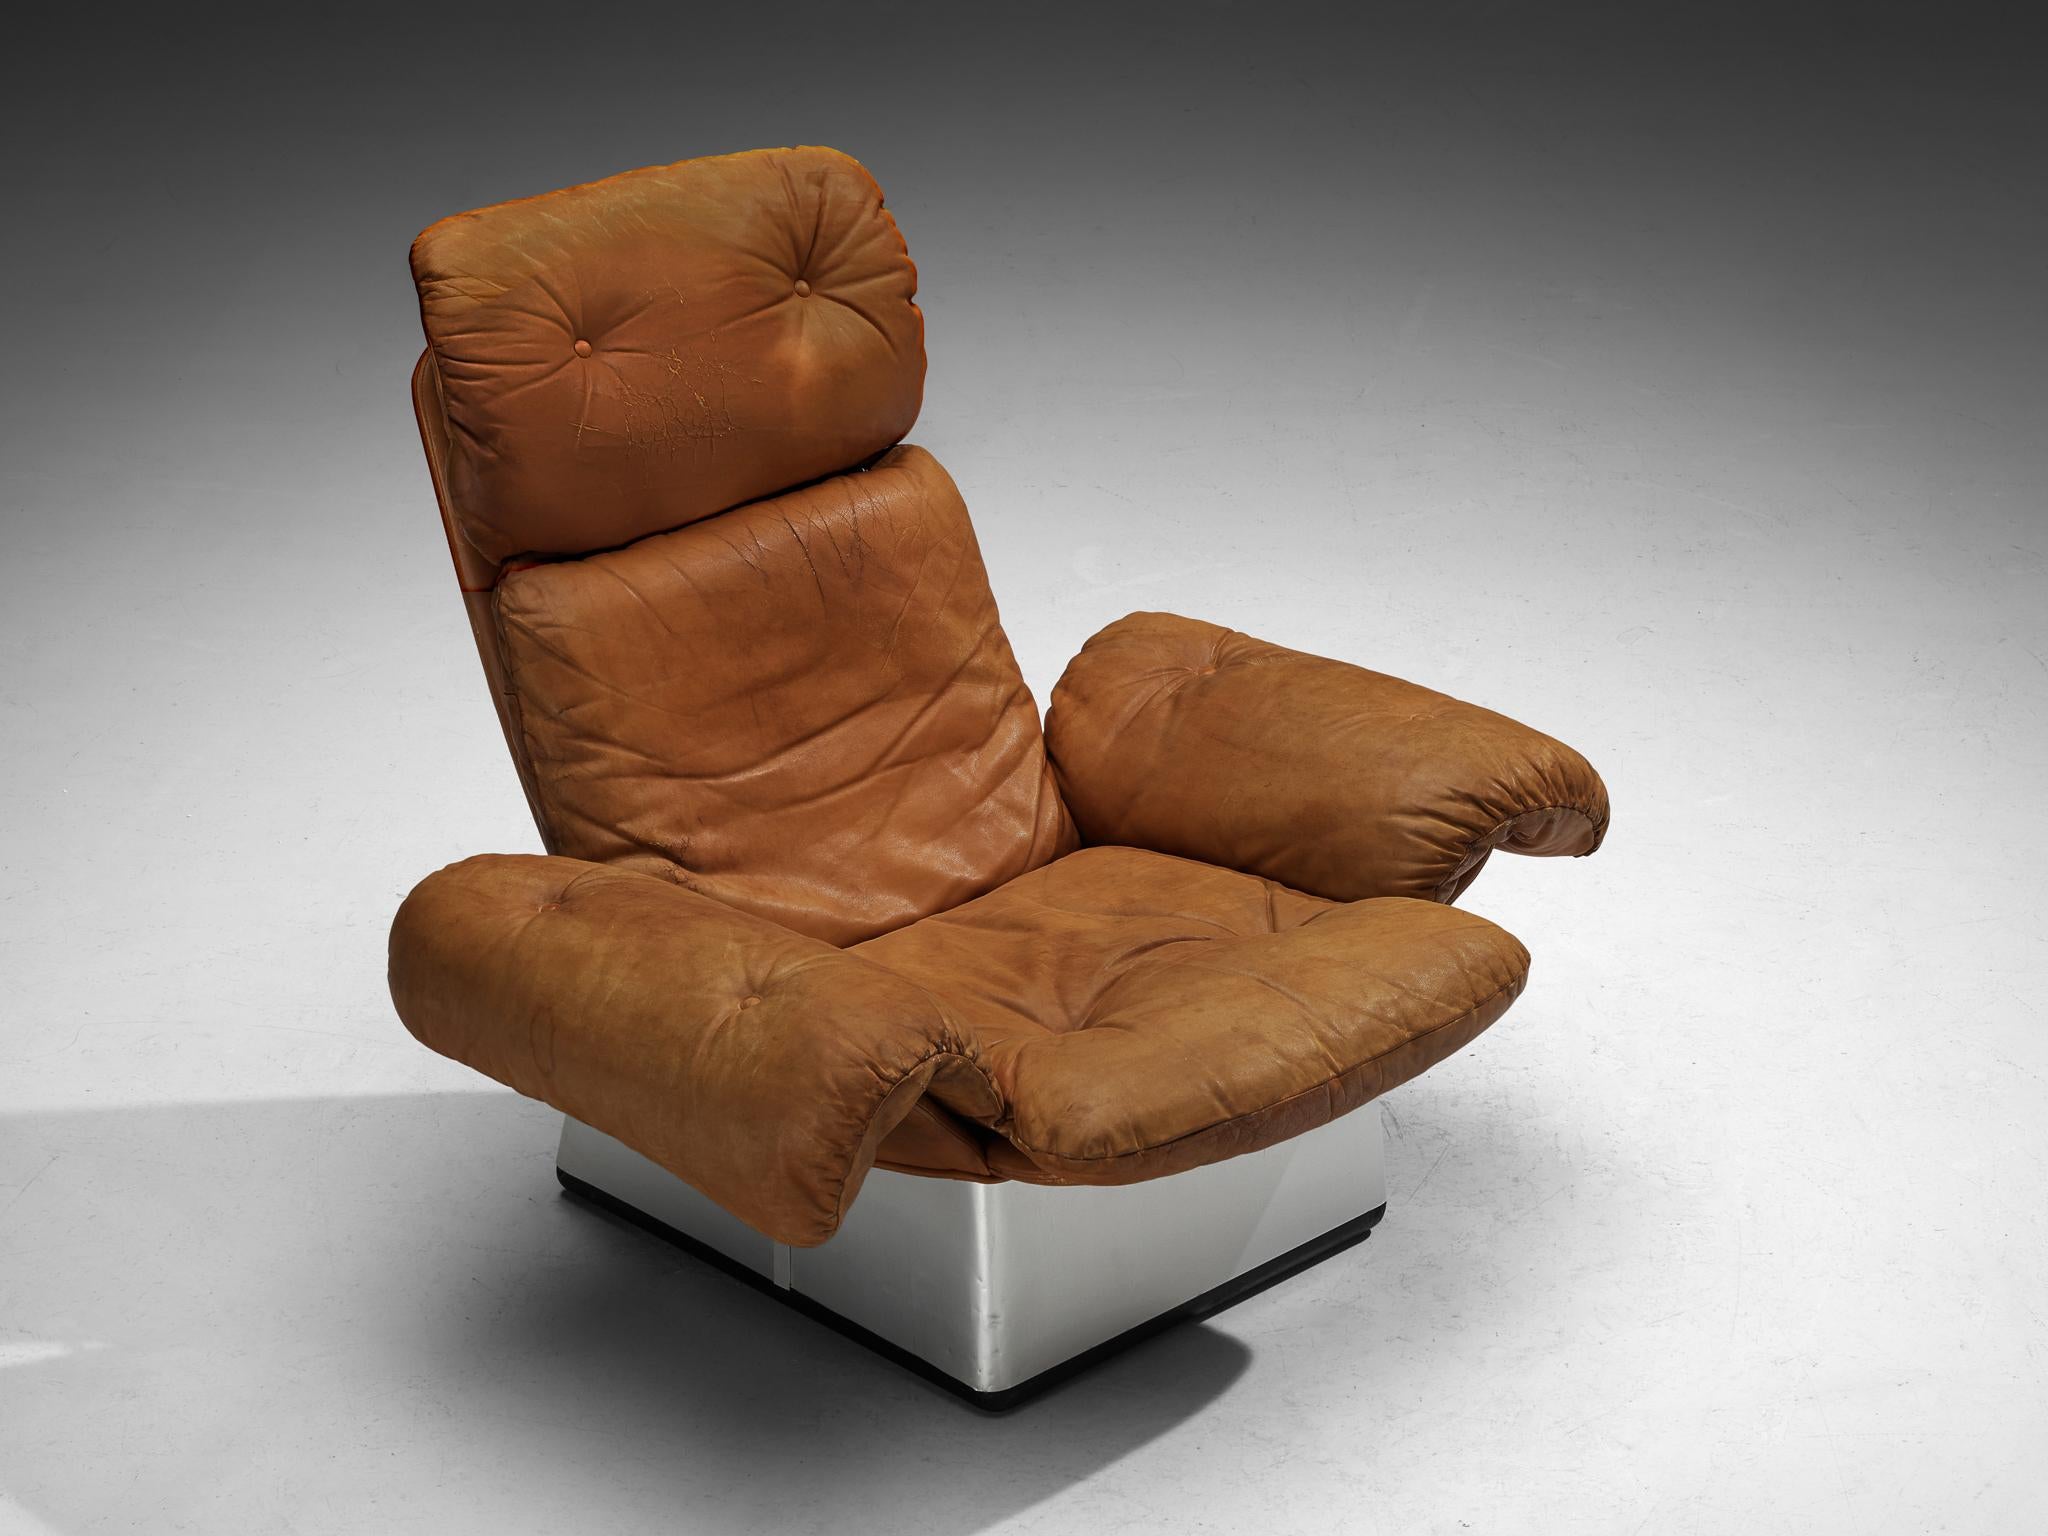 Lounge chair, leather, aluminum, Italy 1970s

A lounge chair made in Italy in the 1970s. This chair strongly represents the essence of furniture design of the 1970s, going beyond the strict conventions of modernism, with the exploration of the